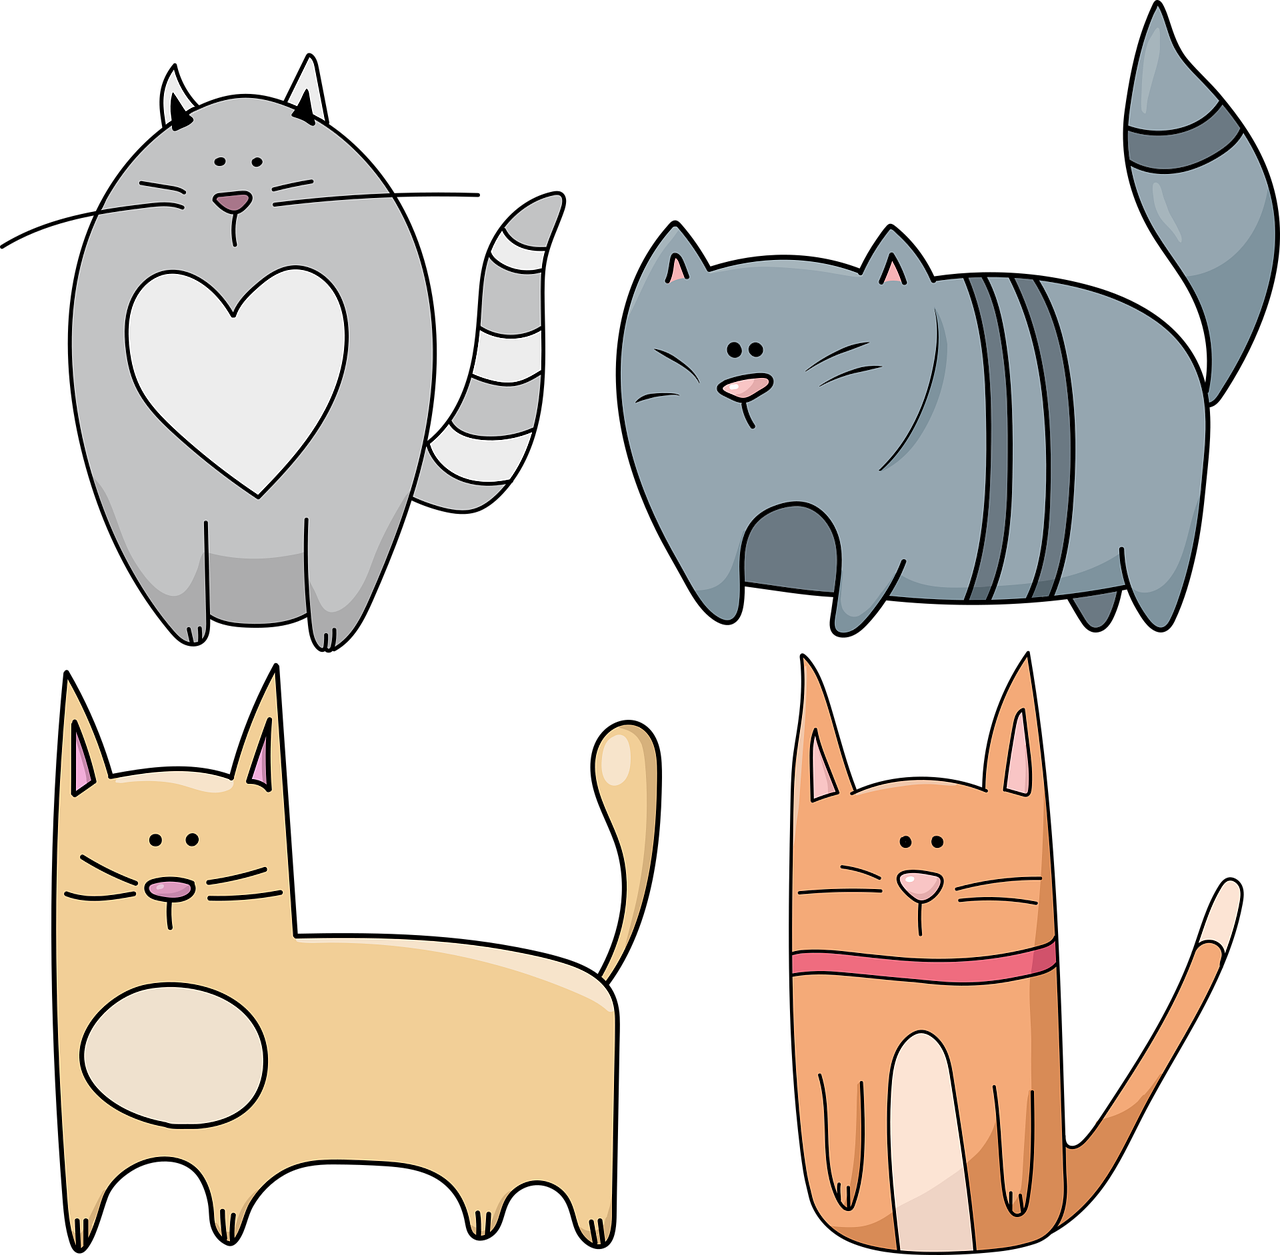 a group of cats standing next to each other, vector art, in front of a black background, different shapes and sizes, cartoon style illustration, a cat is smiling